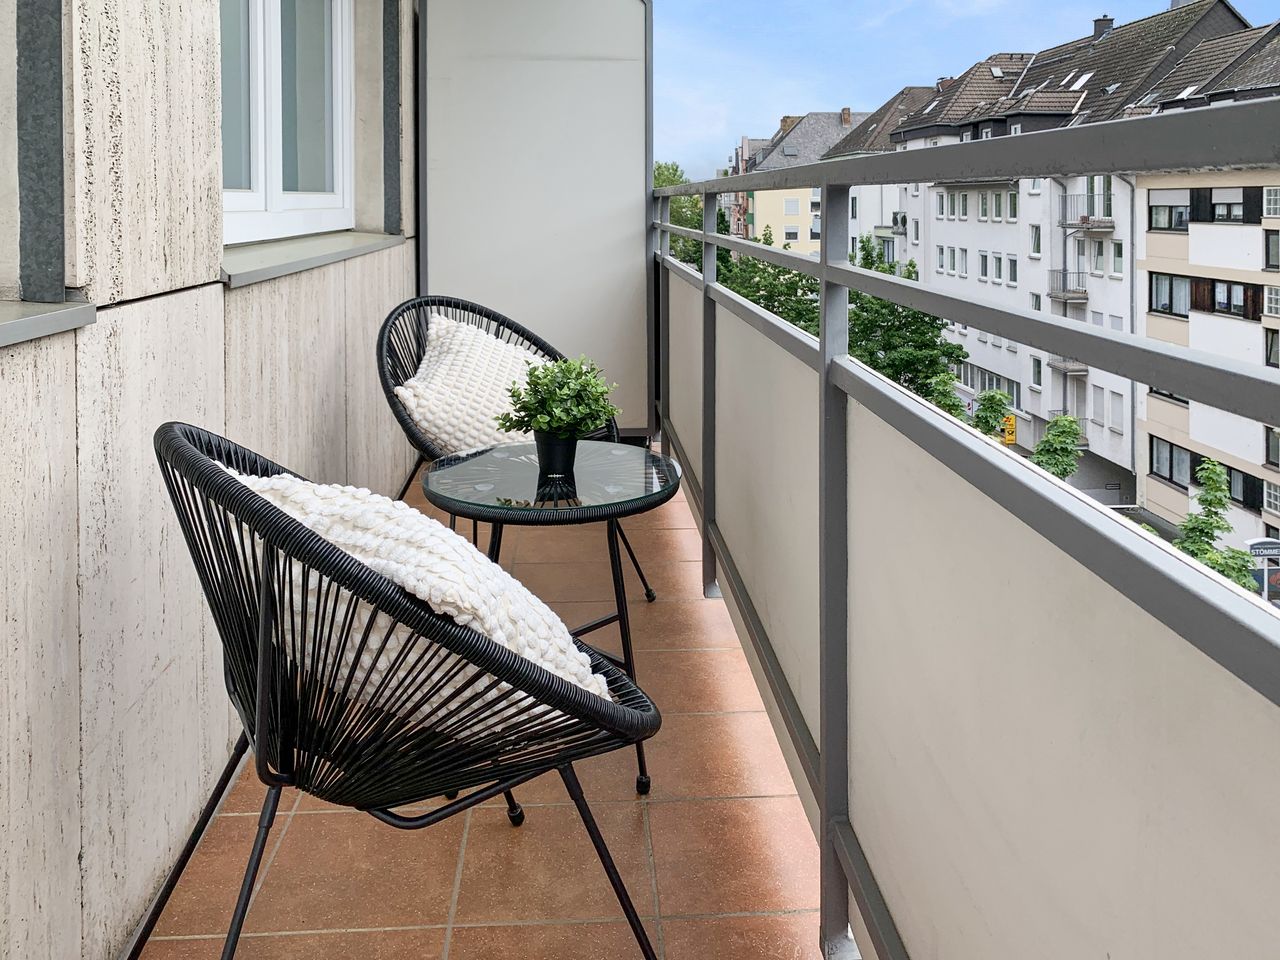 Fully furnished 2-bedroom apartment in prime location in Koblenz Südstadt - Close to train station and River Rhine